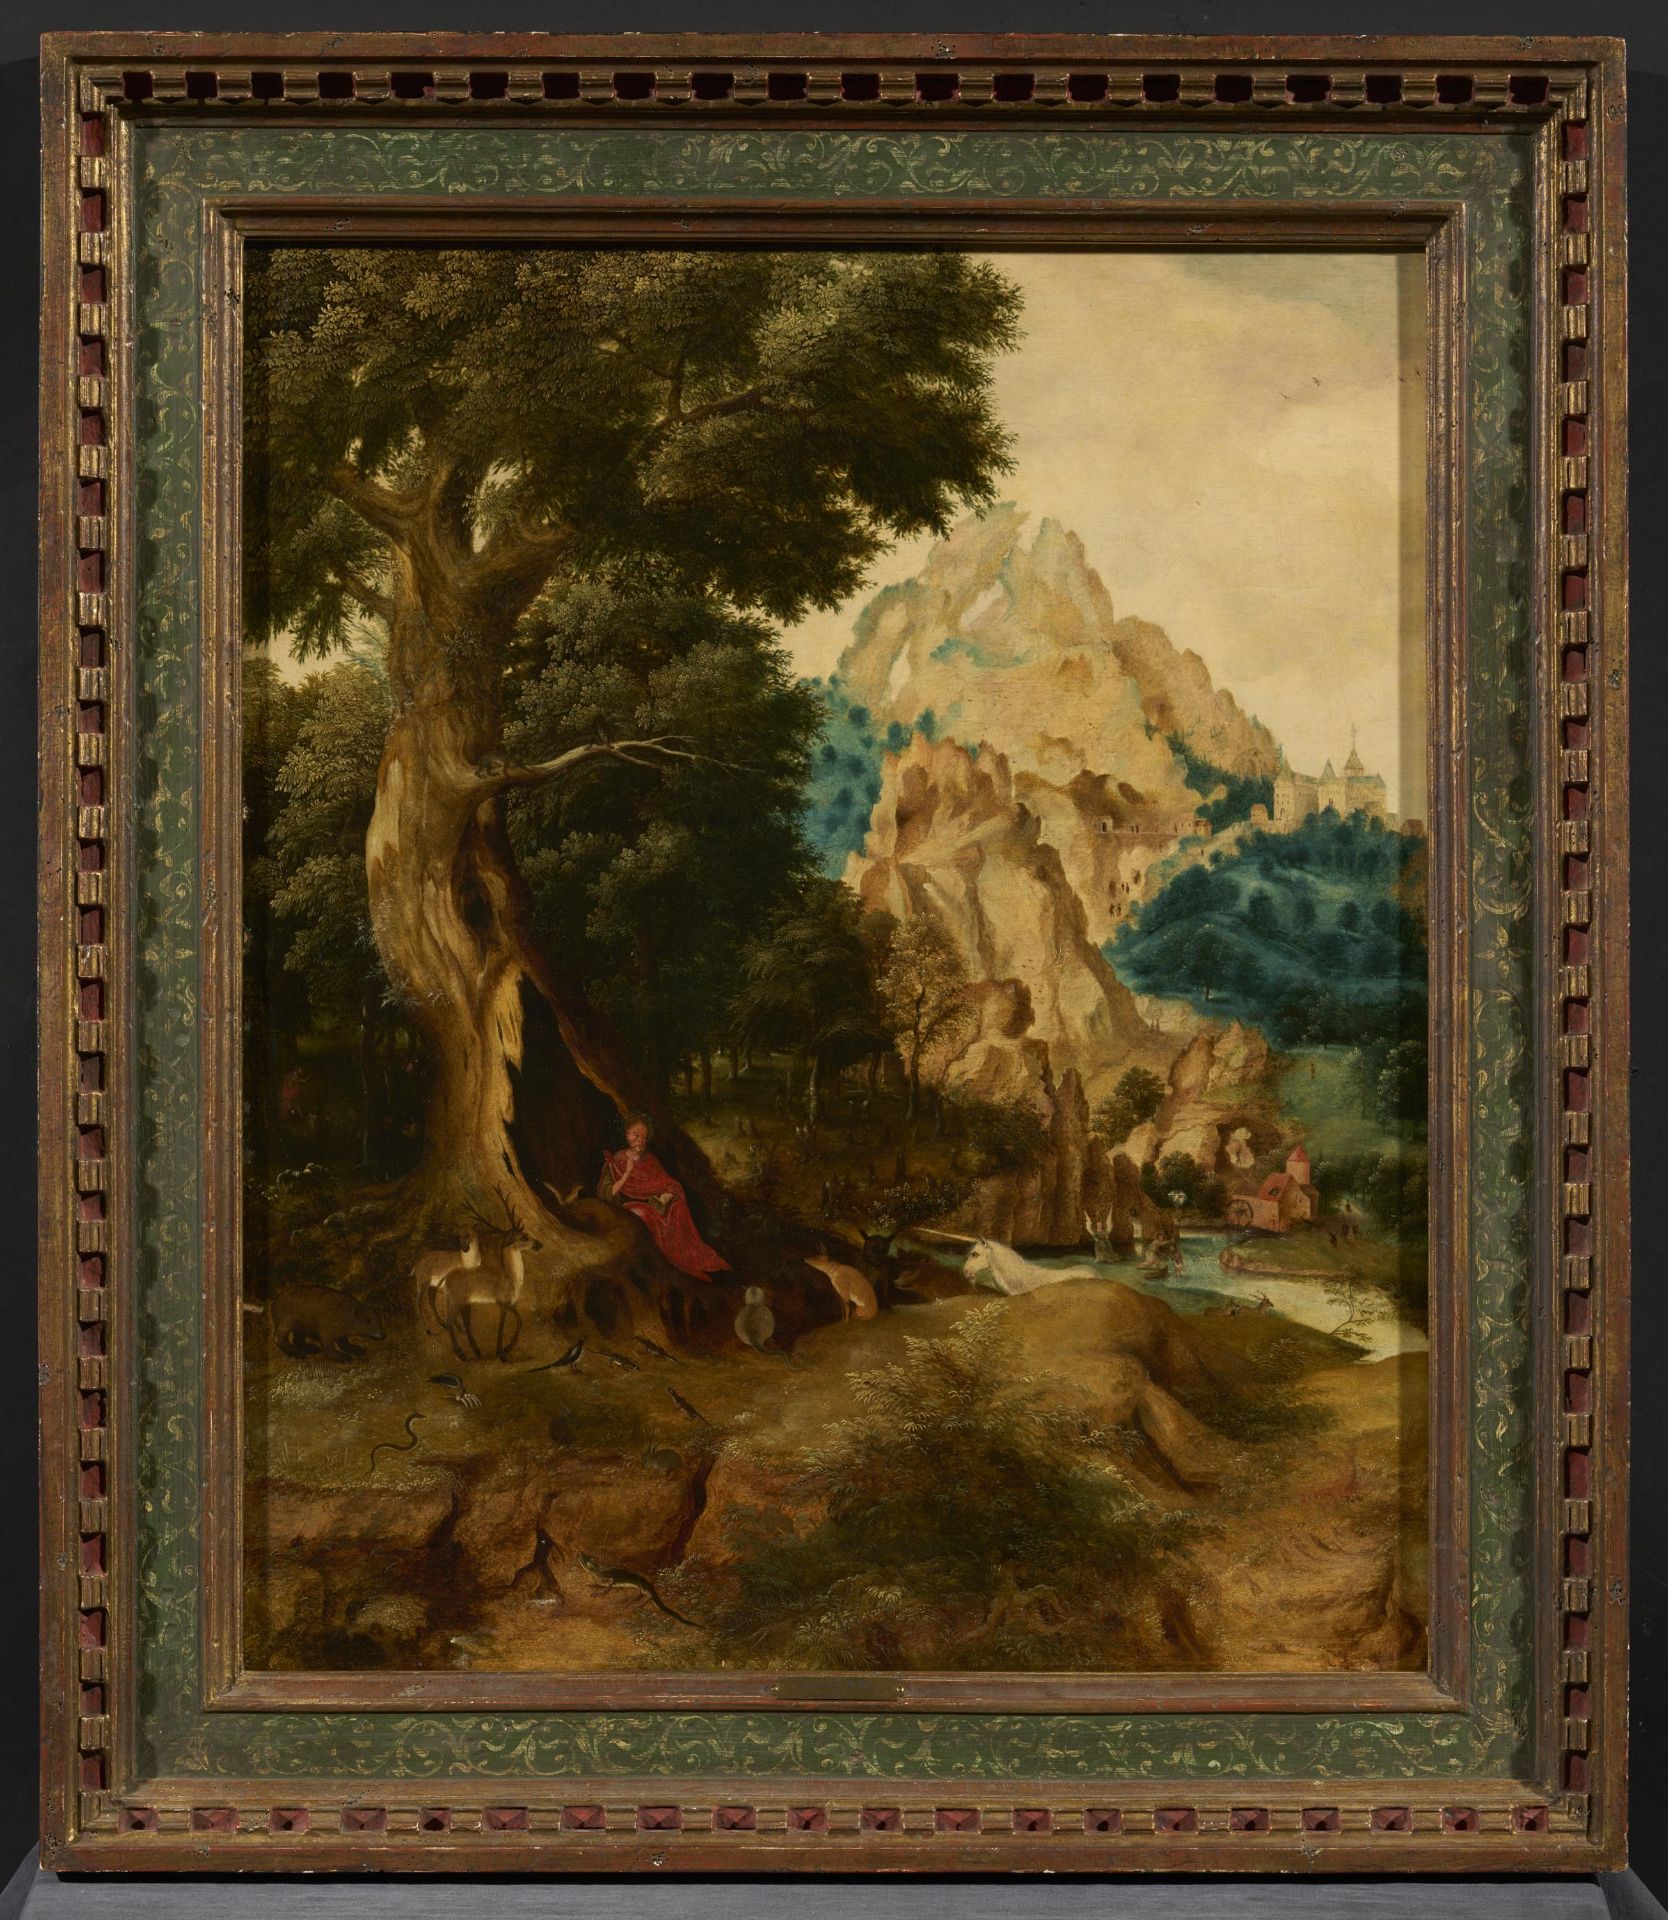 Herri met de Bles. Mountain Landscape with Scenes from the Life of John the Baptist - Image 2 of 5